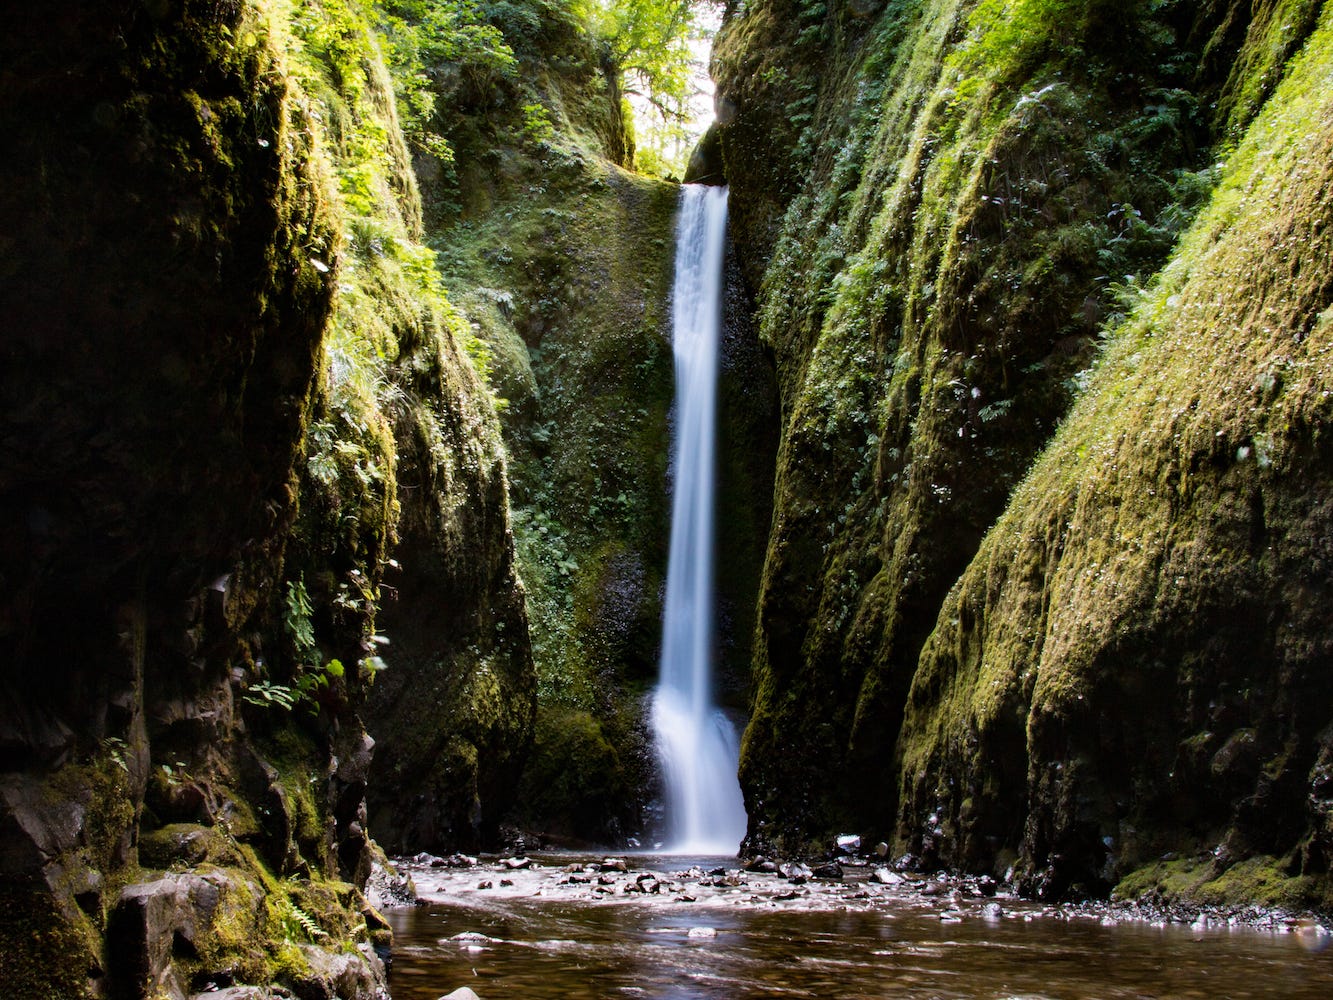 <p>The gorge is tucked away inside <a href="https://www.insider.com/best-waterfalls-in-the-us-2018-3#oneonta-gorge-oregon-4">vibrant green cliffs</a>.</p>